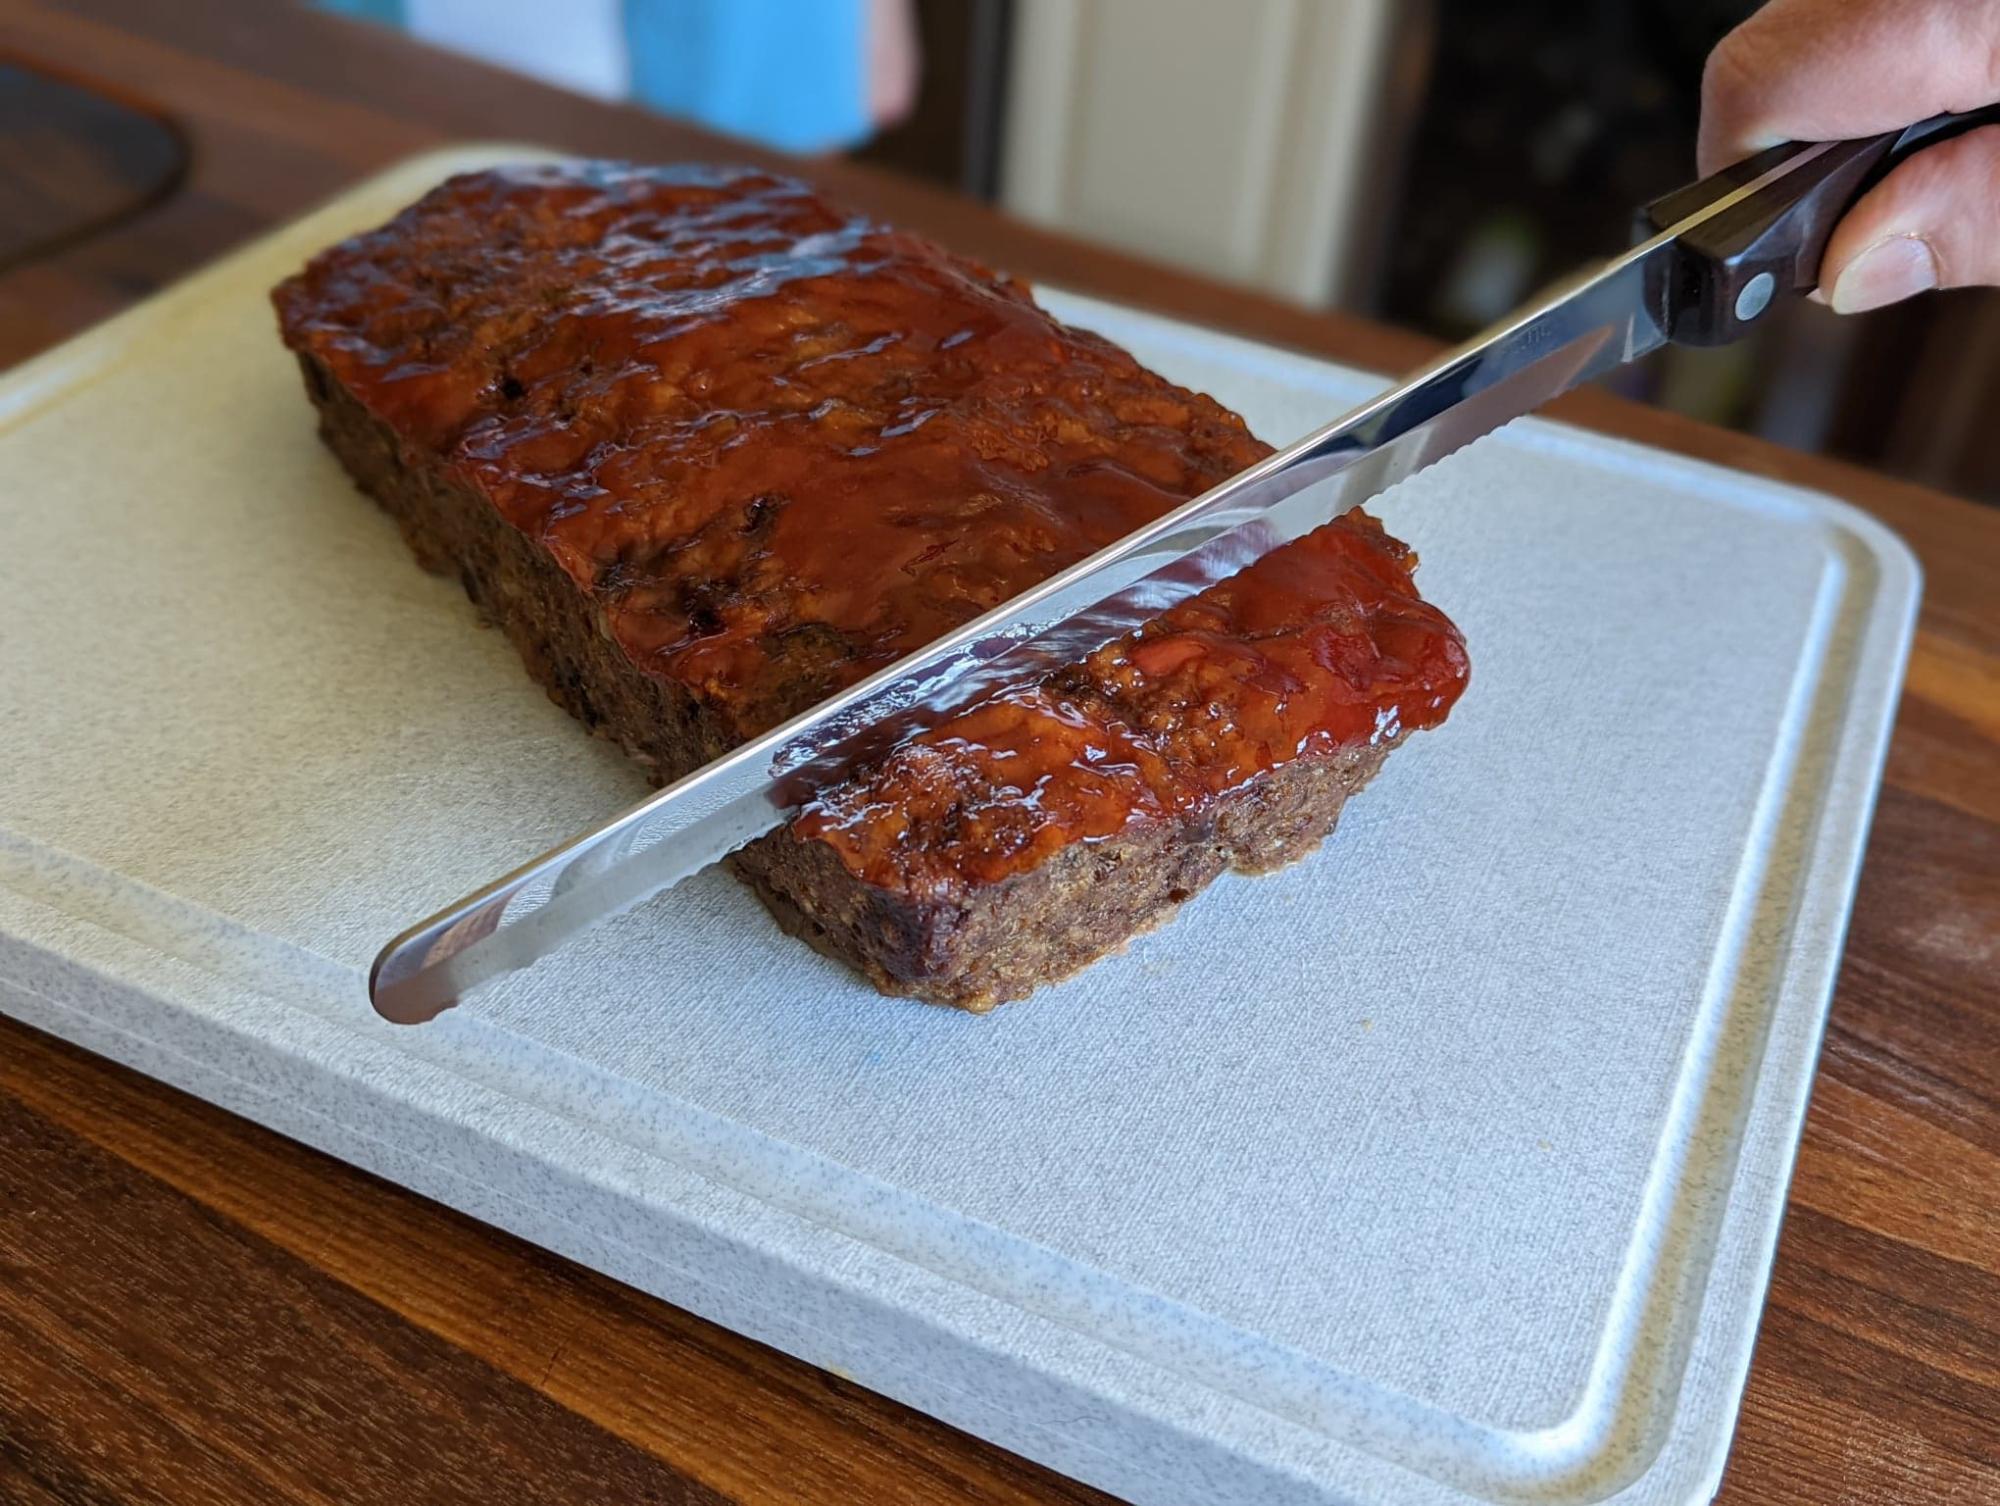 Slicing the meatloaf with a Petite Slicer.